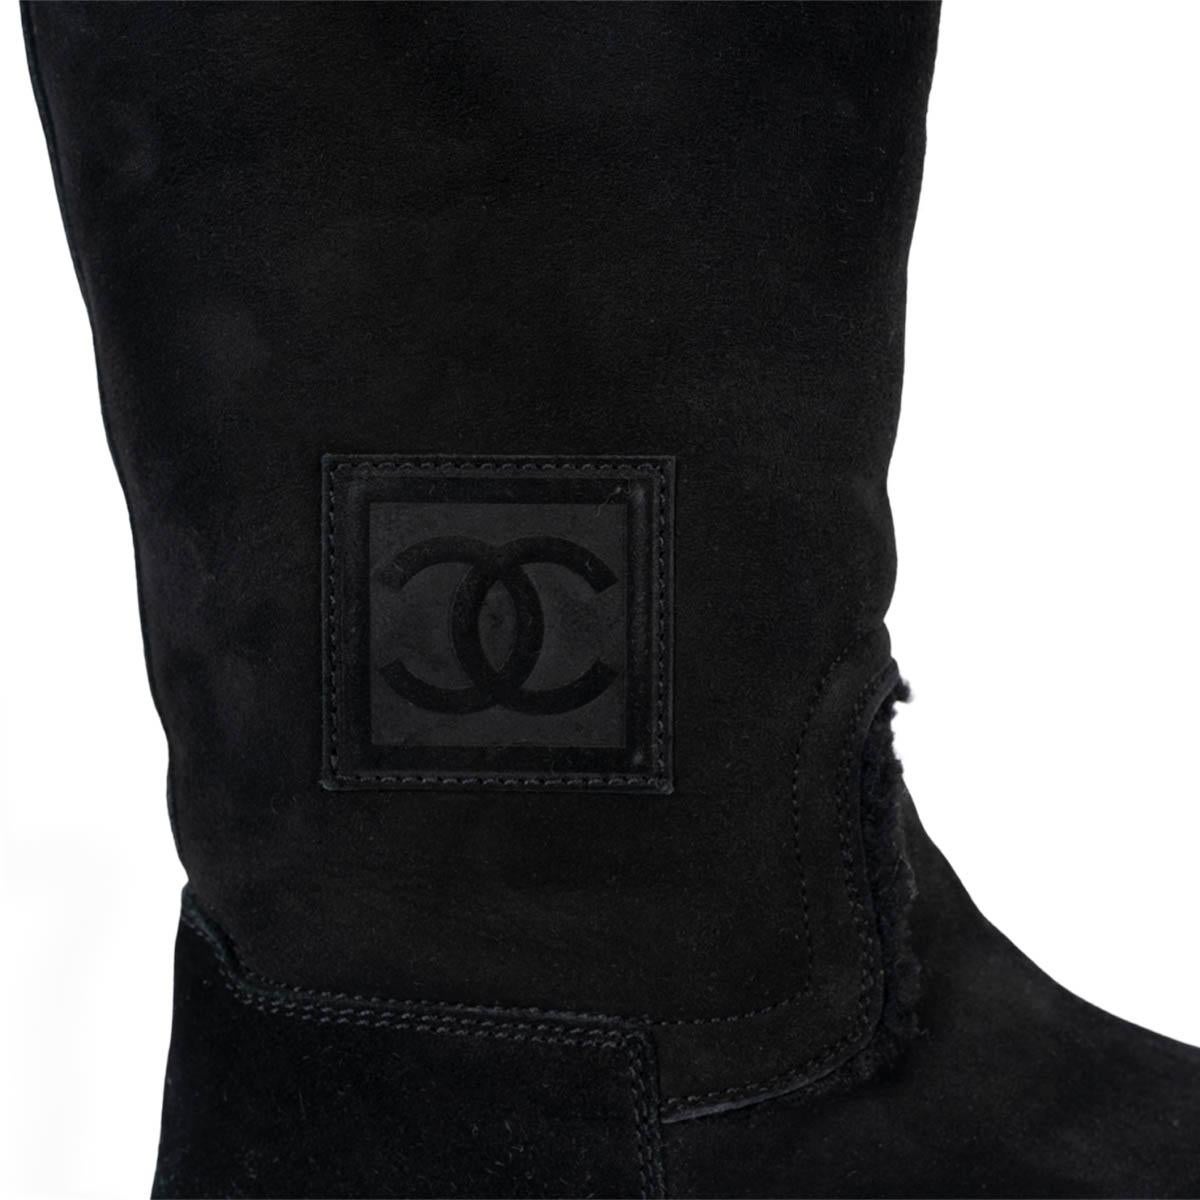 CHANEL black suede 2008 SHEARLING FLAT Boots Shoes 39 2